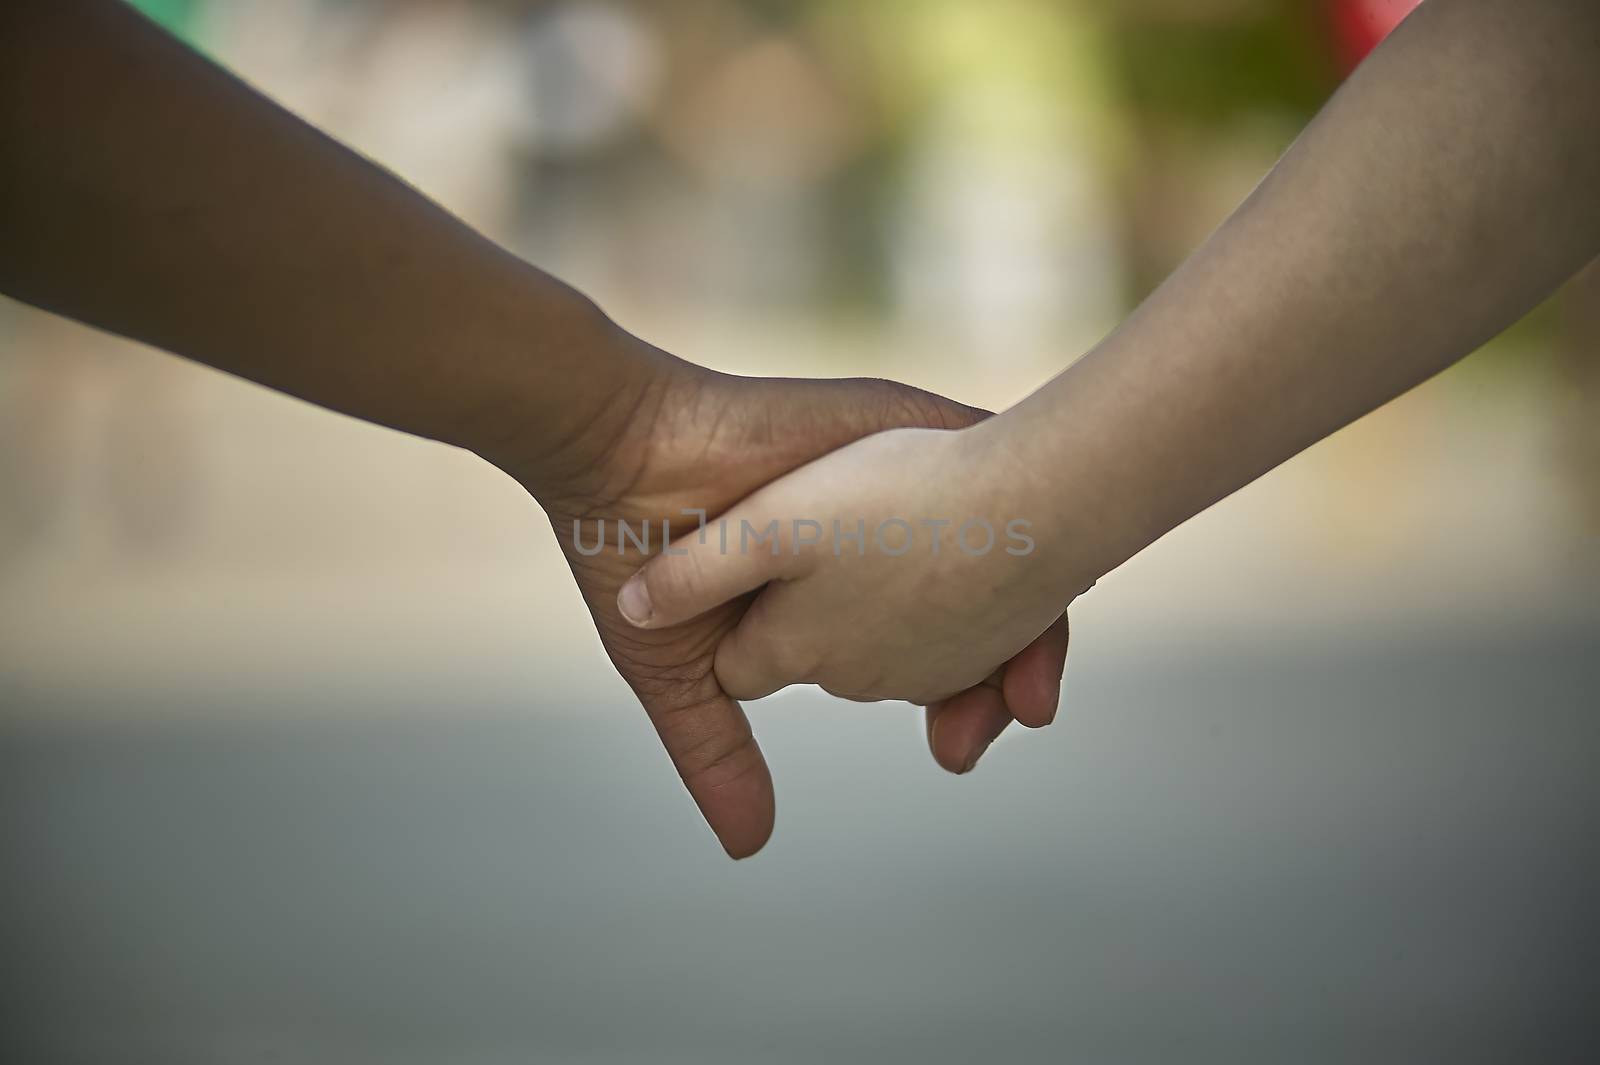 Hands of children shaking, one of the caucasian or white complexion, the other black. Symbol of inertness and equality between the races.